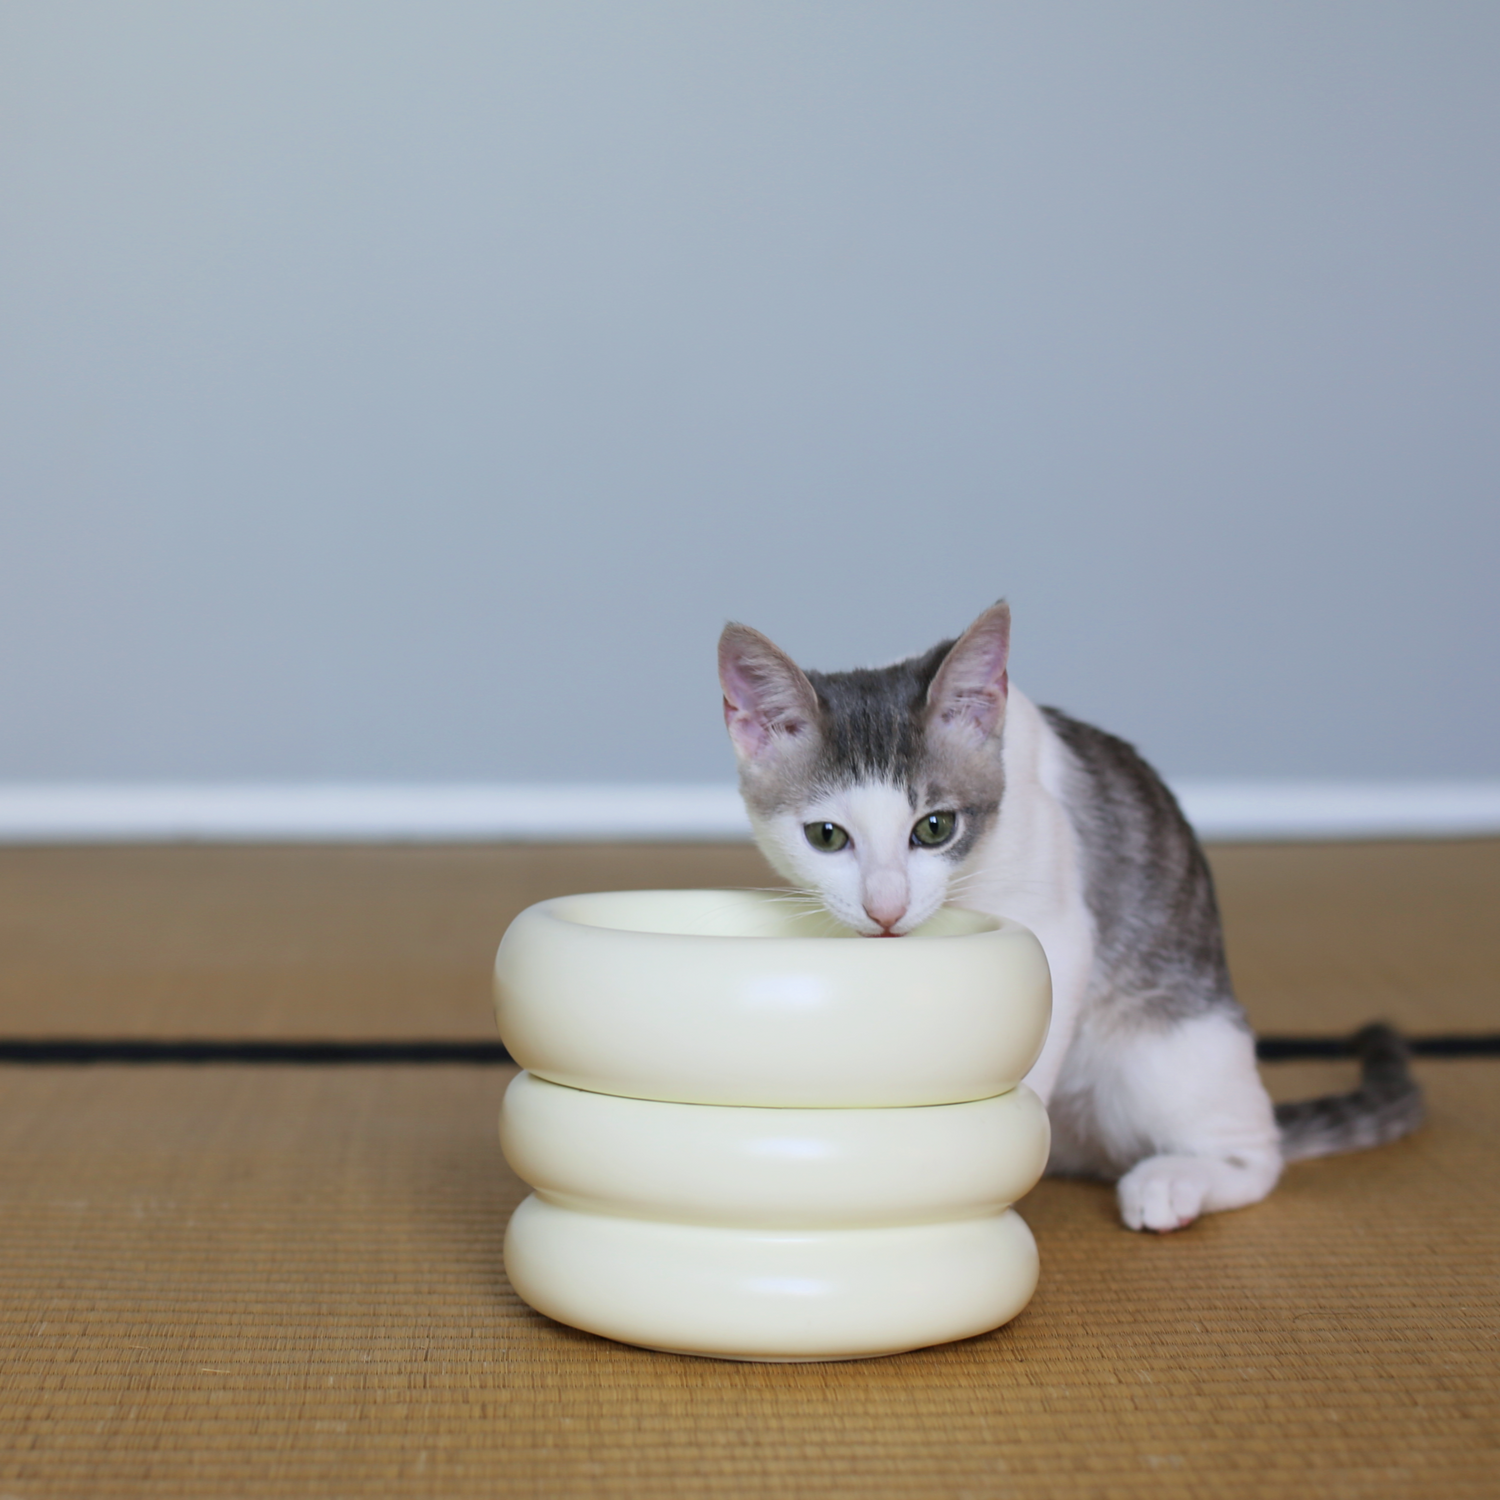 best elevated cat bowl because of stacking modern cat bowl feature in white ceramic with grey and white cat eating from tatami mat by catenary that is elevated to be anti-vomiting bowls and prevent whisker fatigue